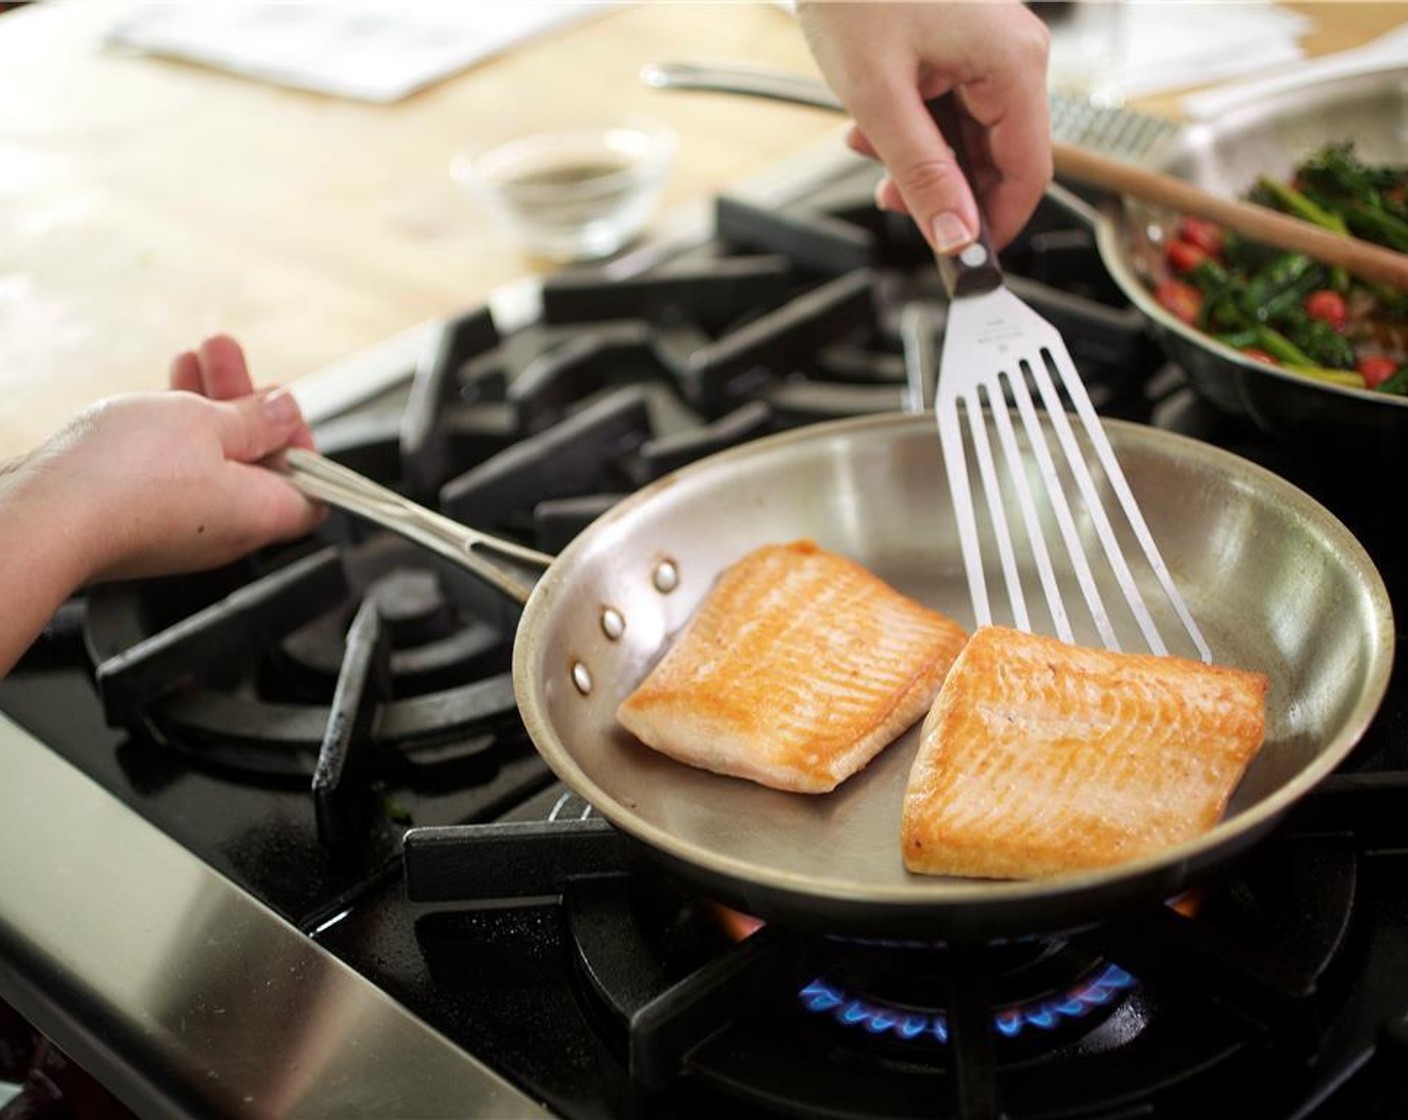 step 5 Pat the Arctic Char Fillets (2) dry with paper towels. Season the fish on both sides with Salt (1/4 tsp). Heat Canola Oil (2 Tbsp) in a large saute pan over medium high heat. When hot, add fish to the pan with the presentation side down. Cook for a minute and a half.